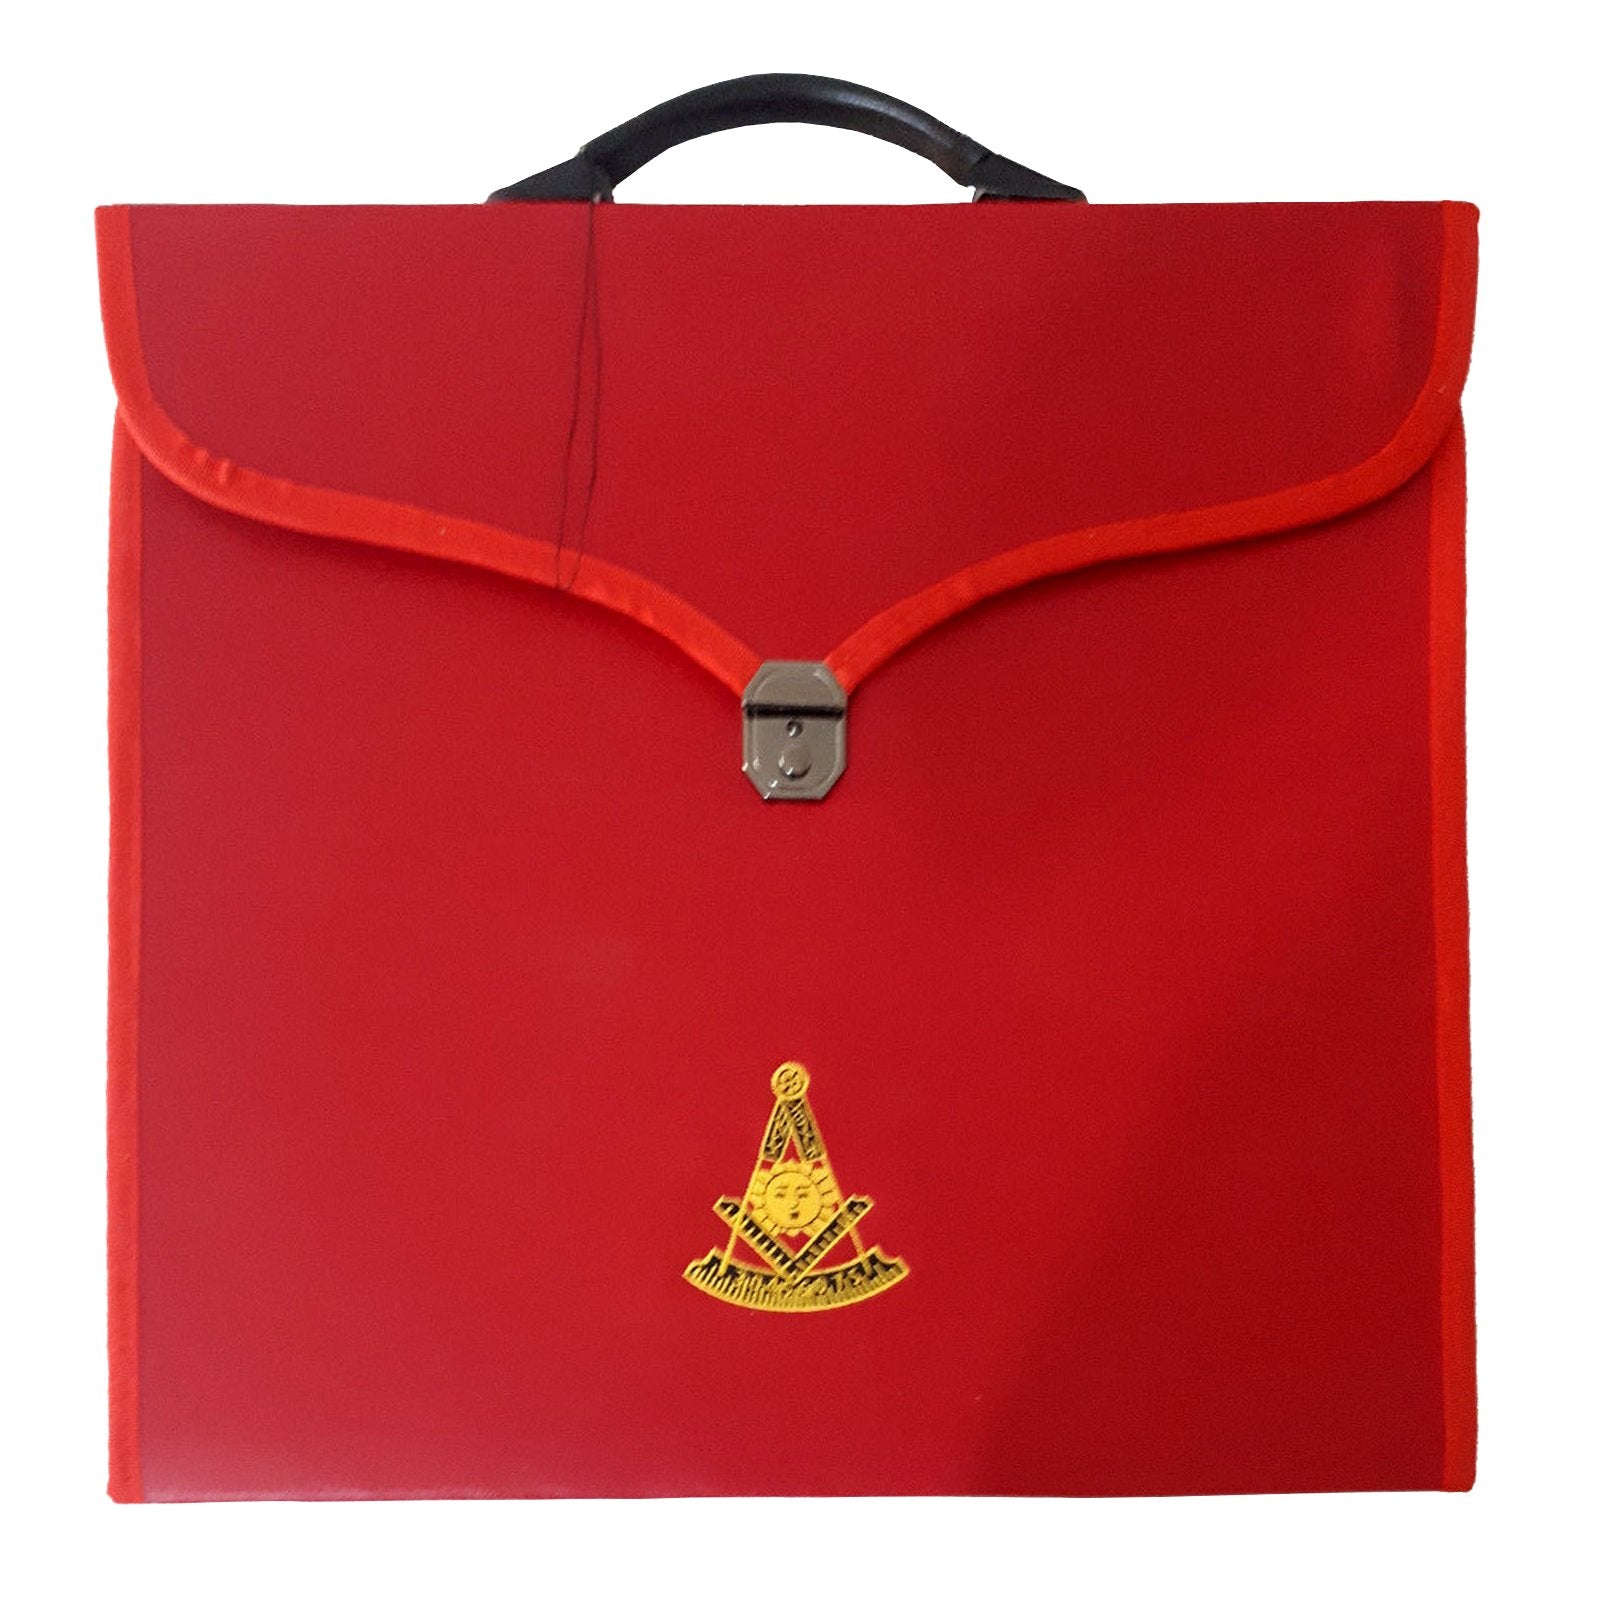 Past Master Blue Lodge Apron Case - Red Leather Different Sizes MM, WM, Provincial - Bricks Masons